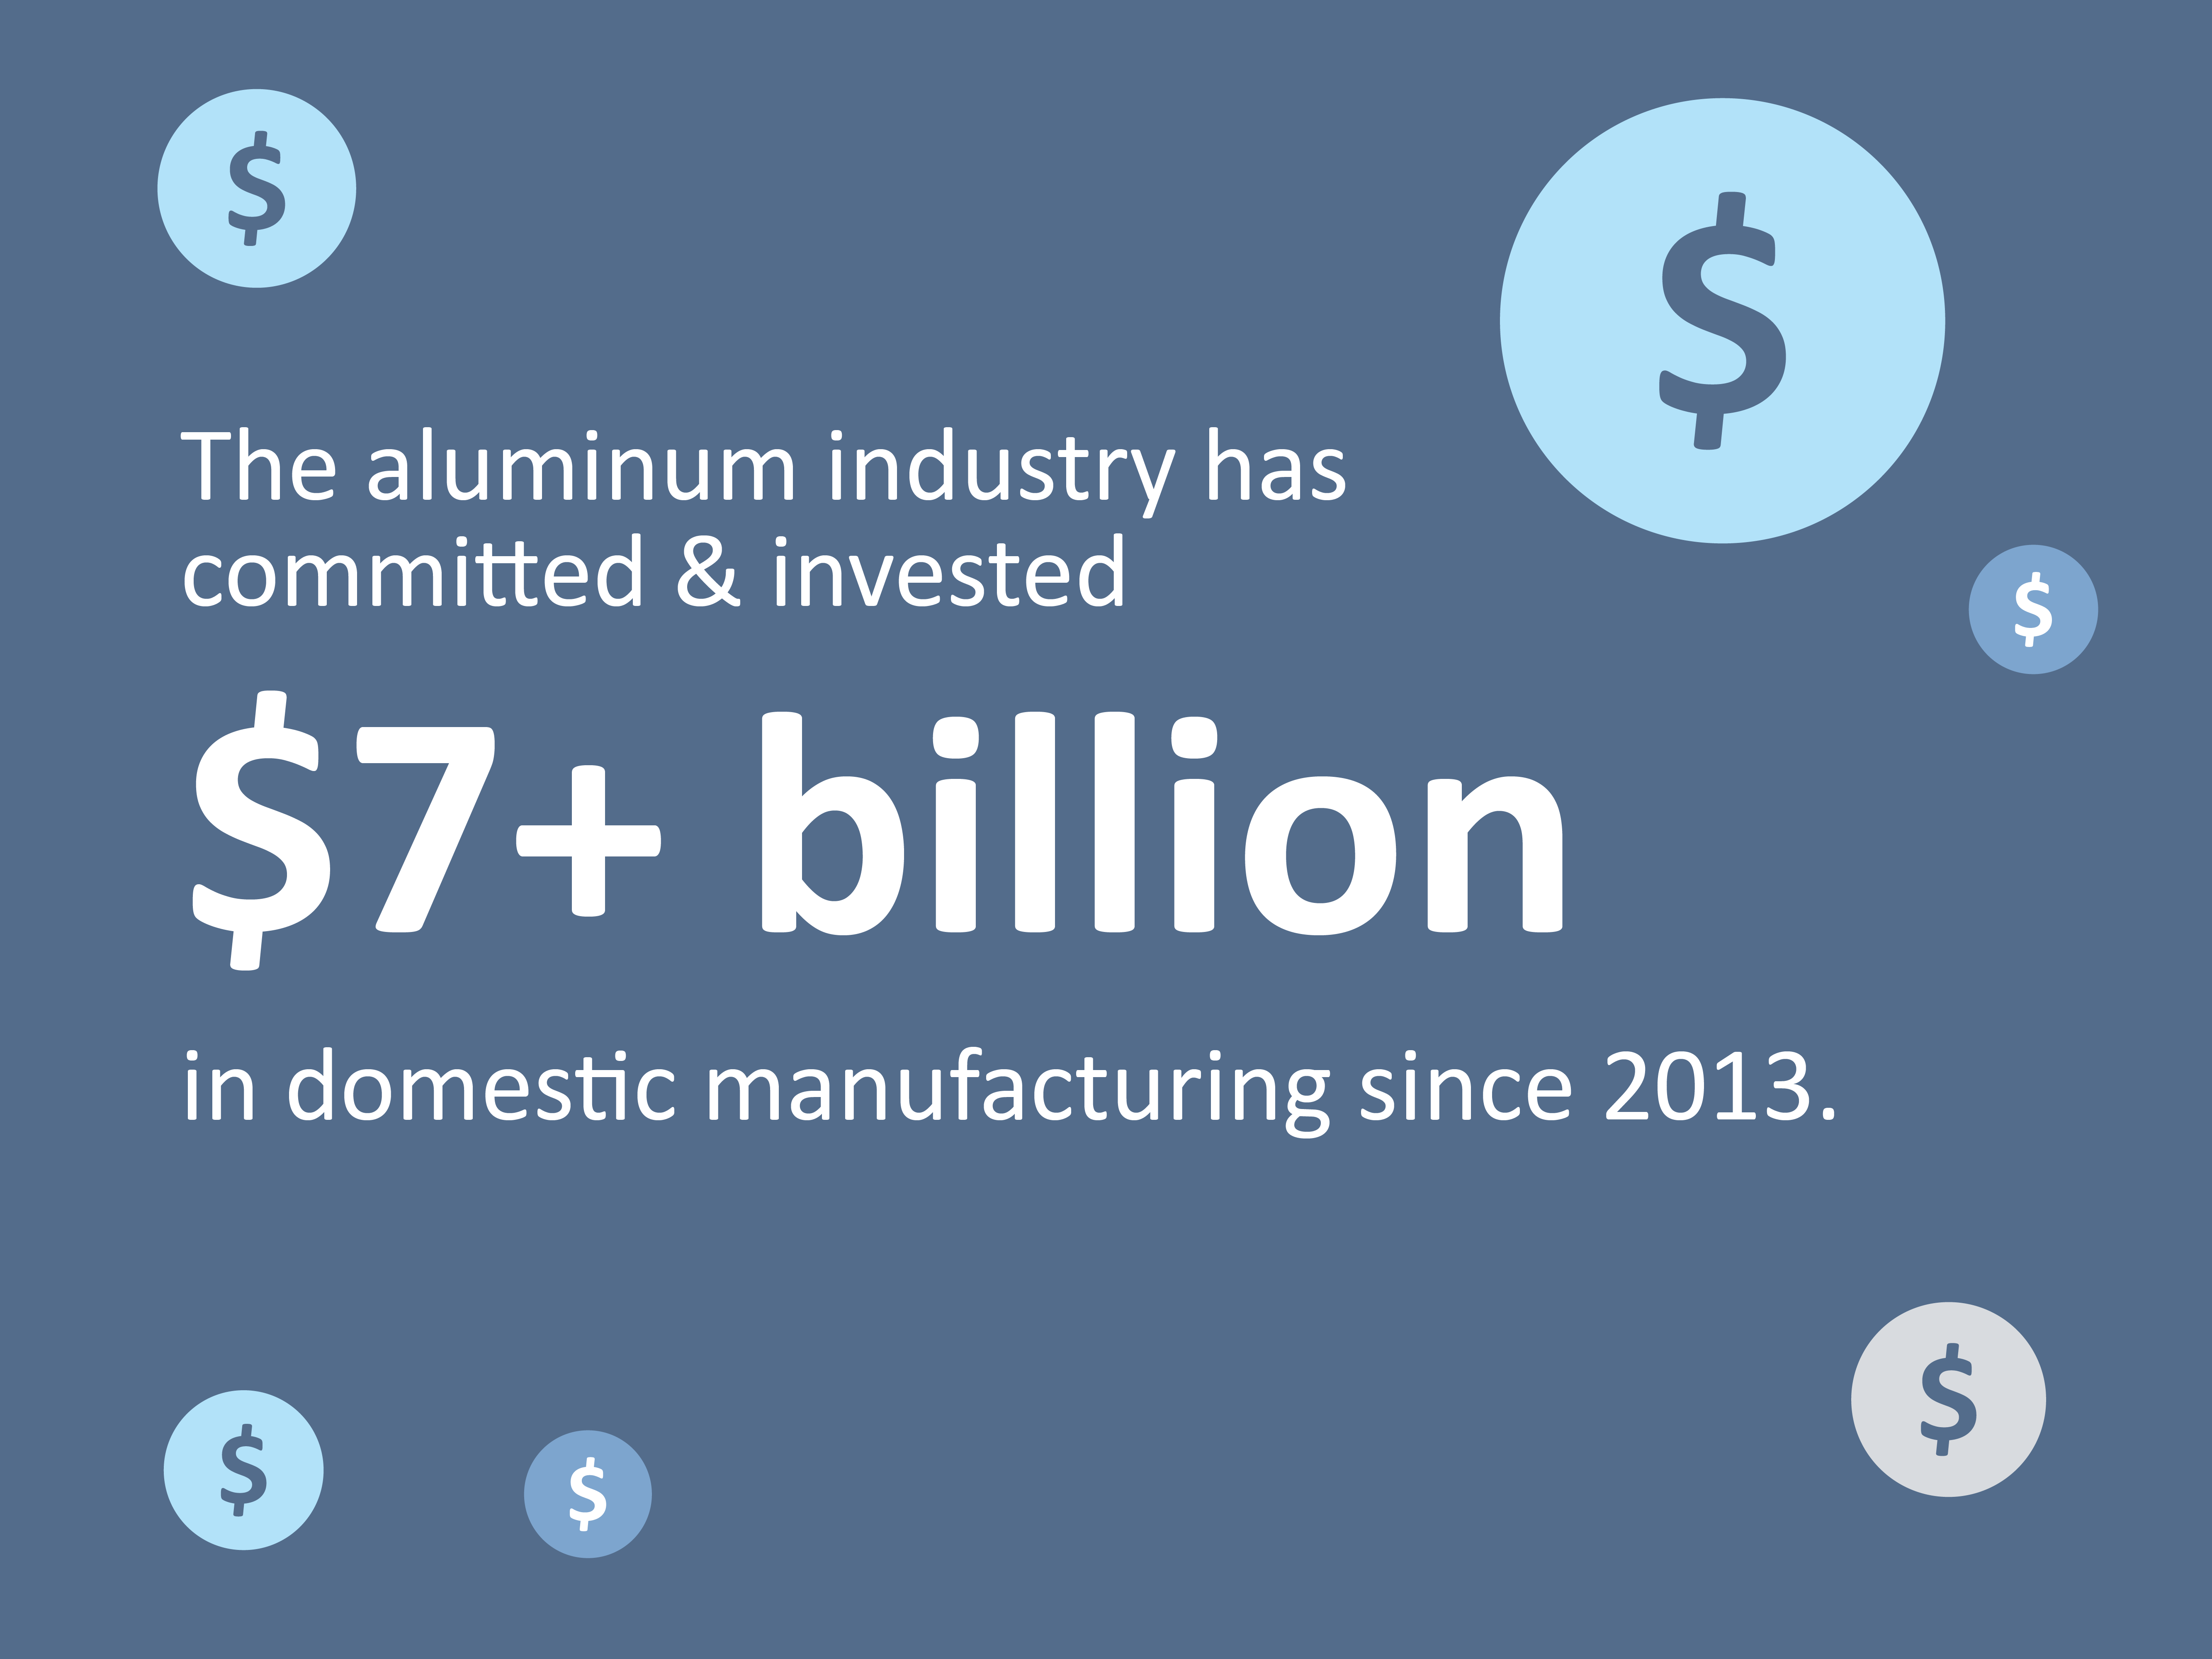 The aluminum industry has committed & invested more than $7 billion in domestic manufacturing since 2013.